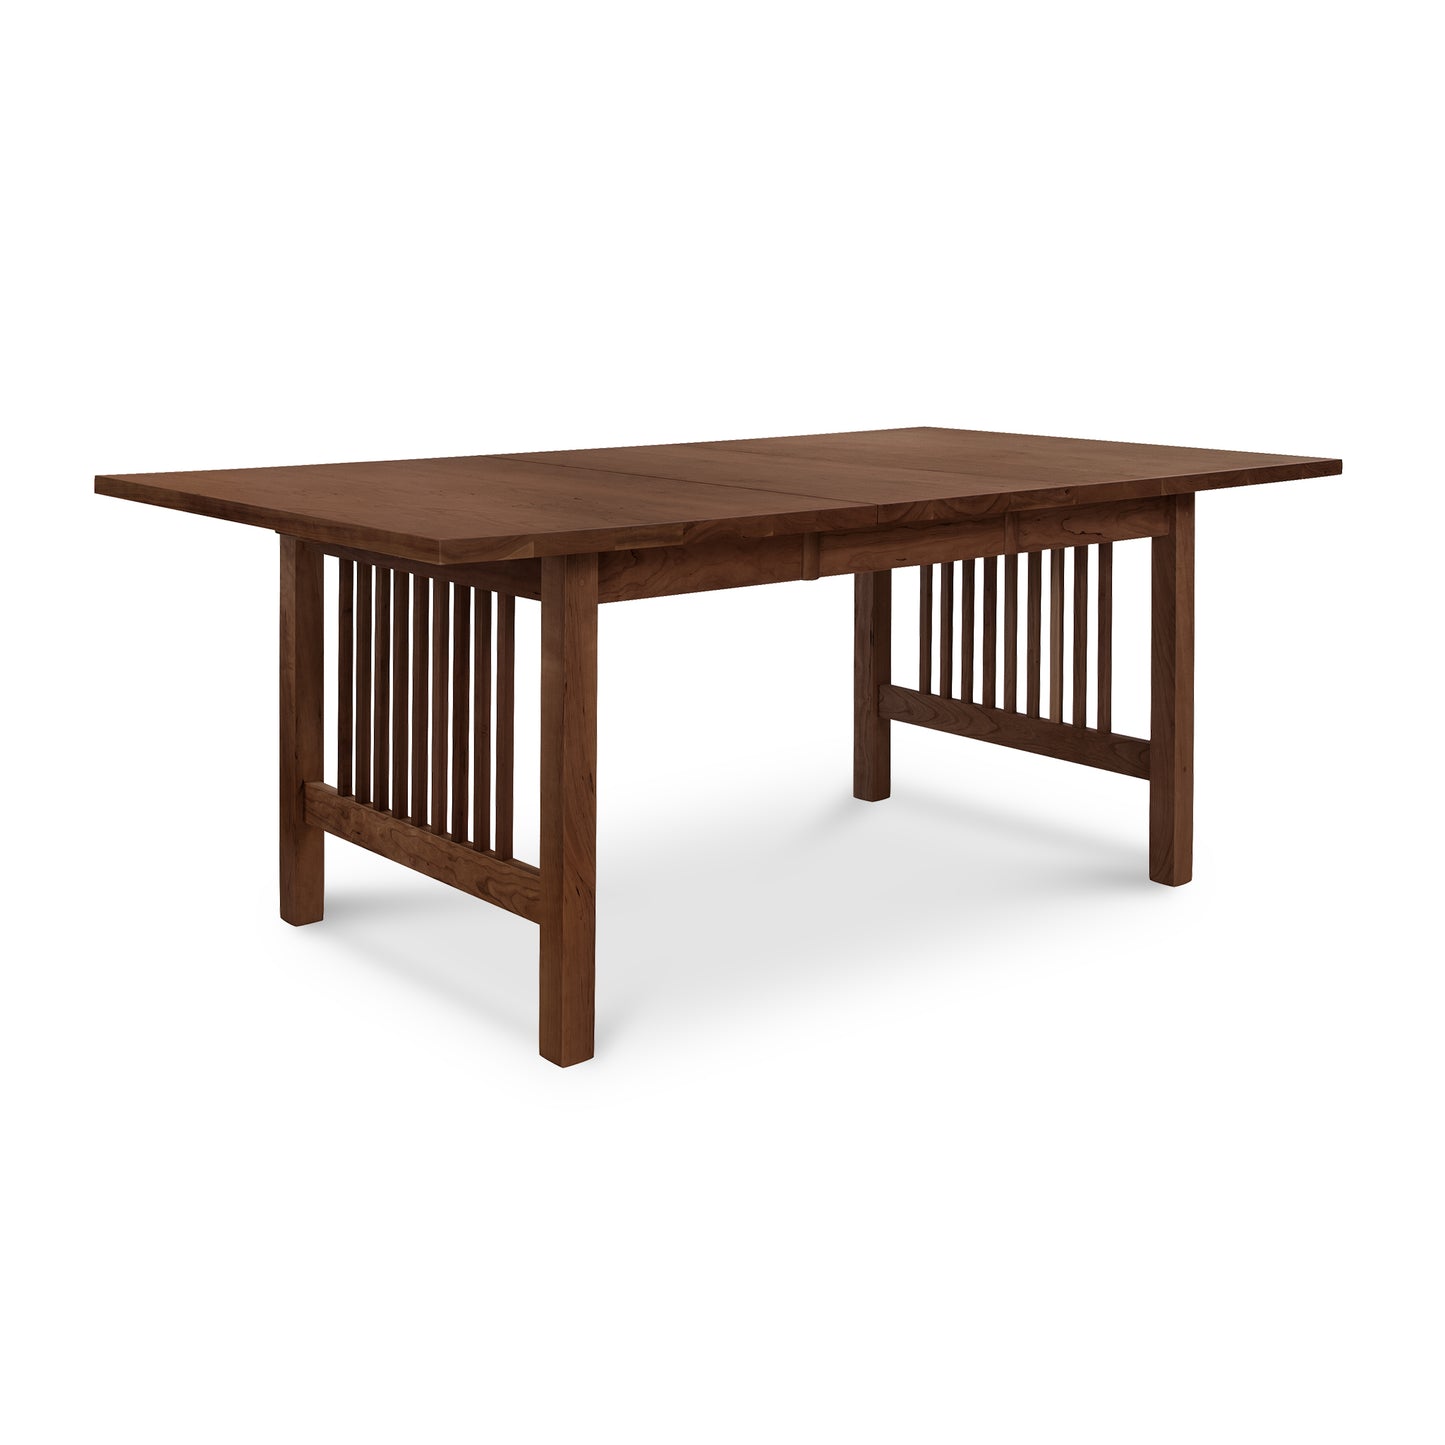 An American Mission Extension dining table by Lyndon Furniture with a wooden top and legs, featuring solid natural wood construction.